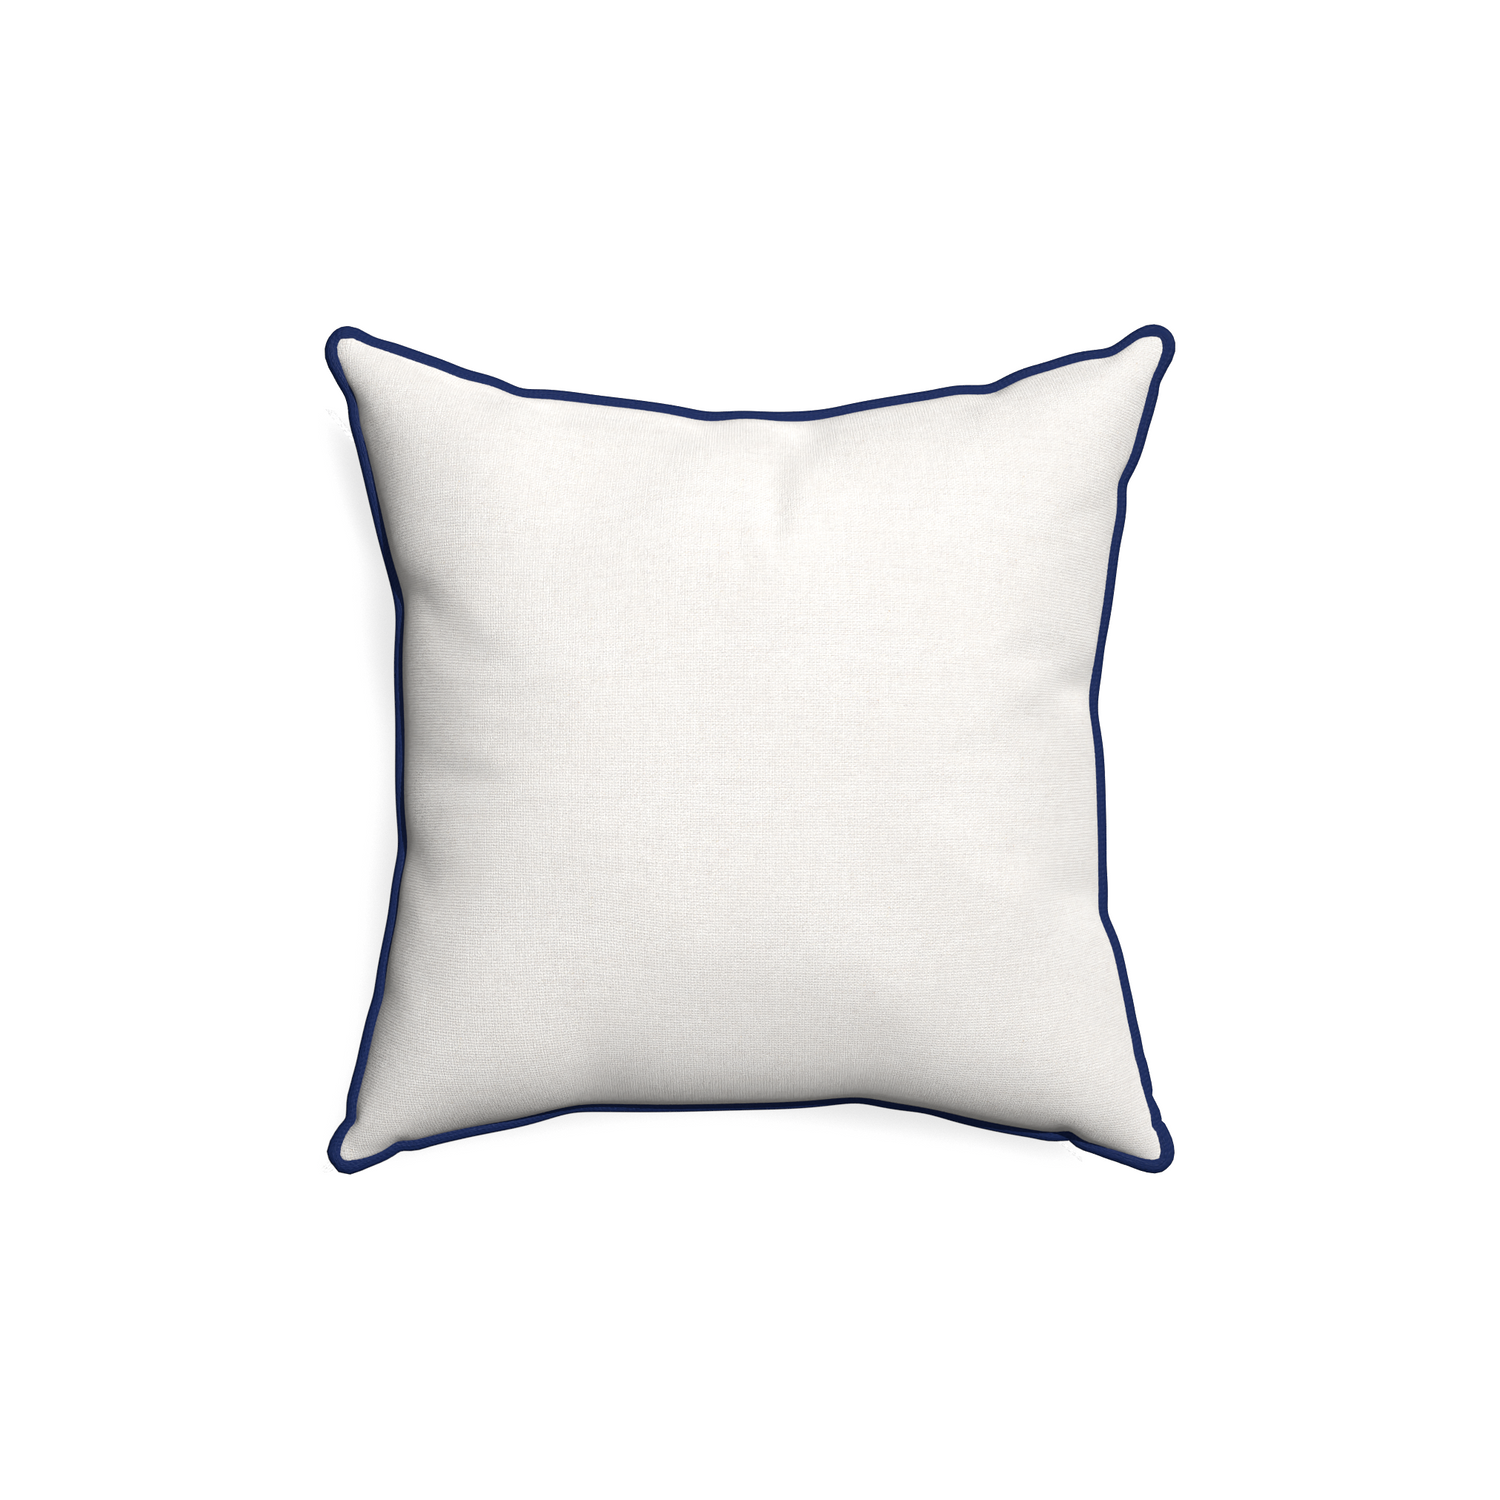 18-square flour custom pillow with midnight piping on white background